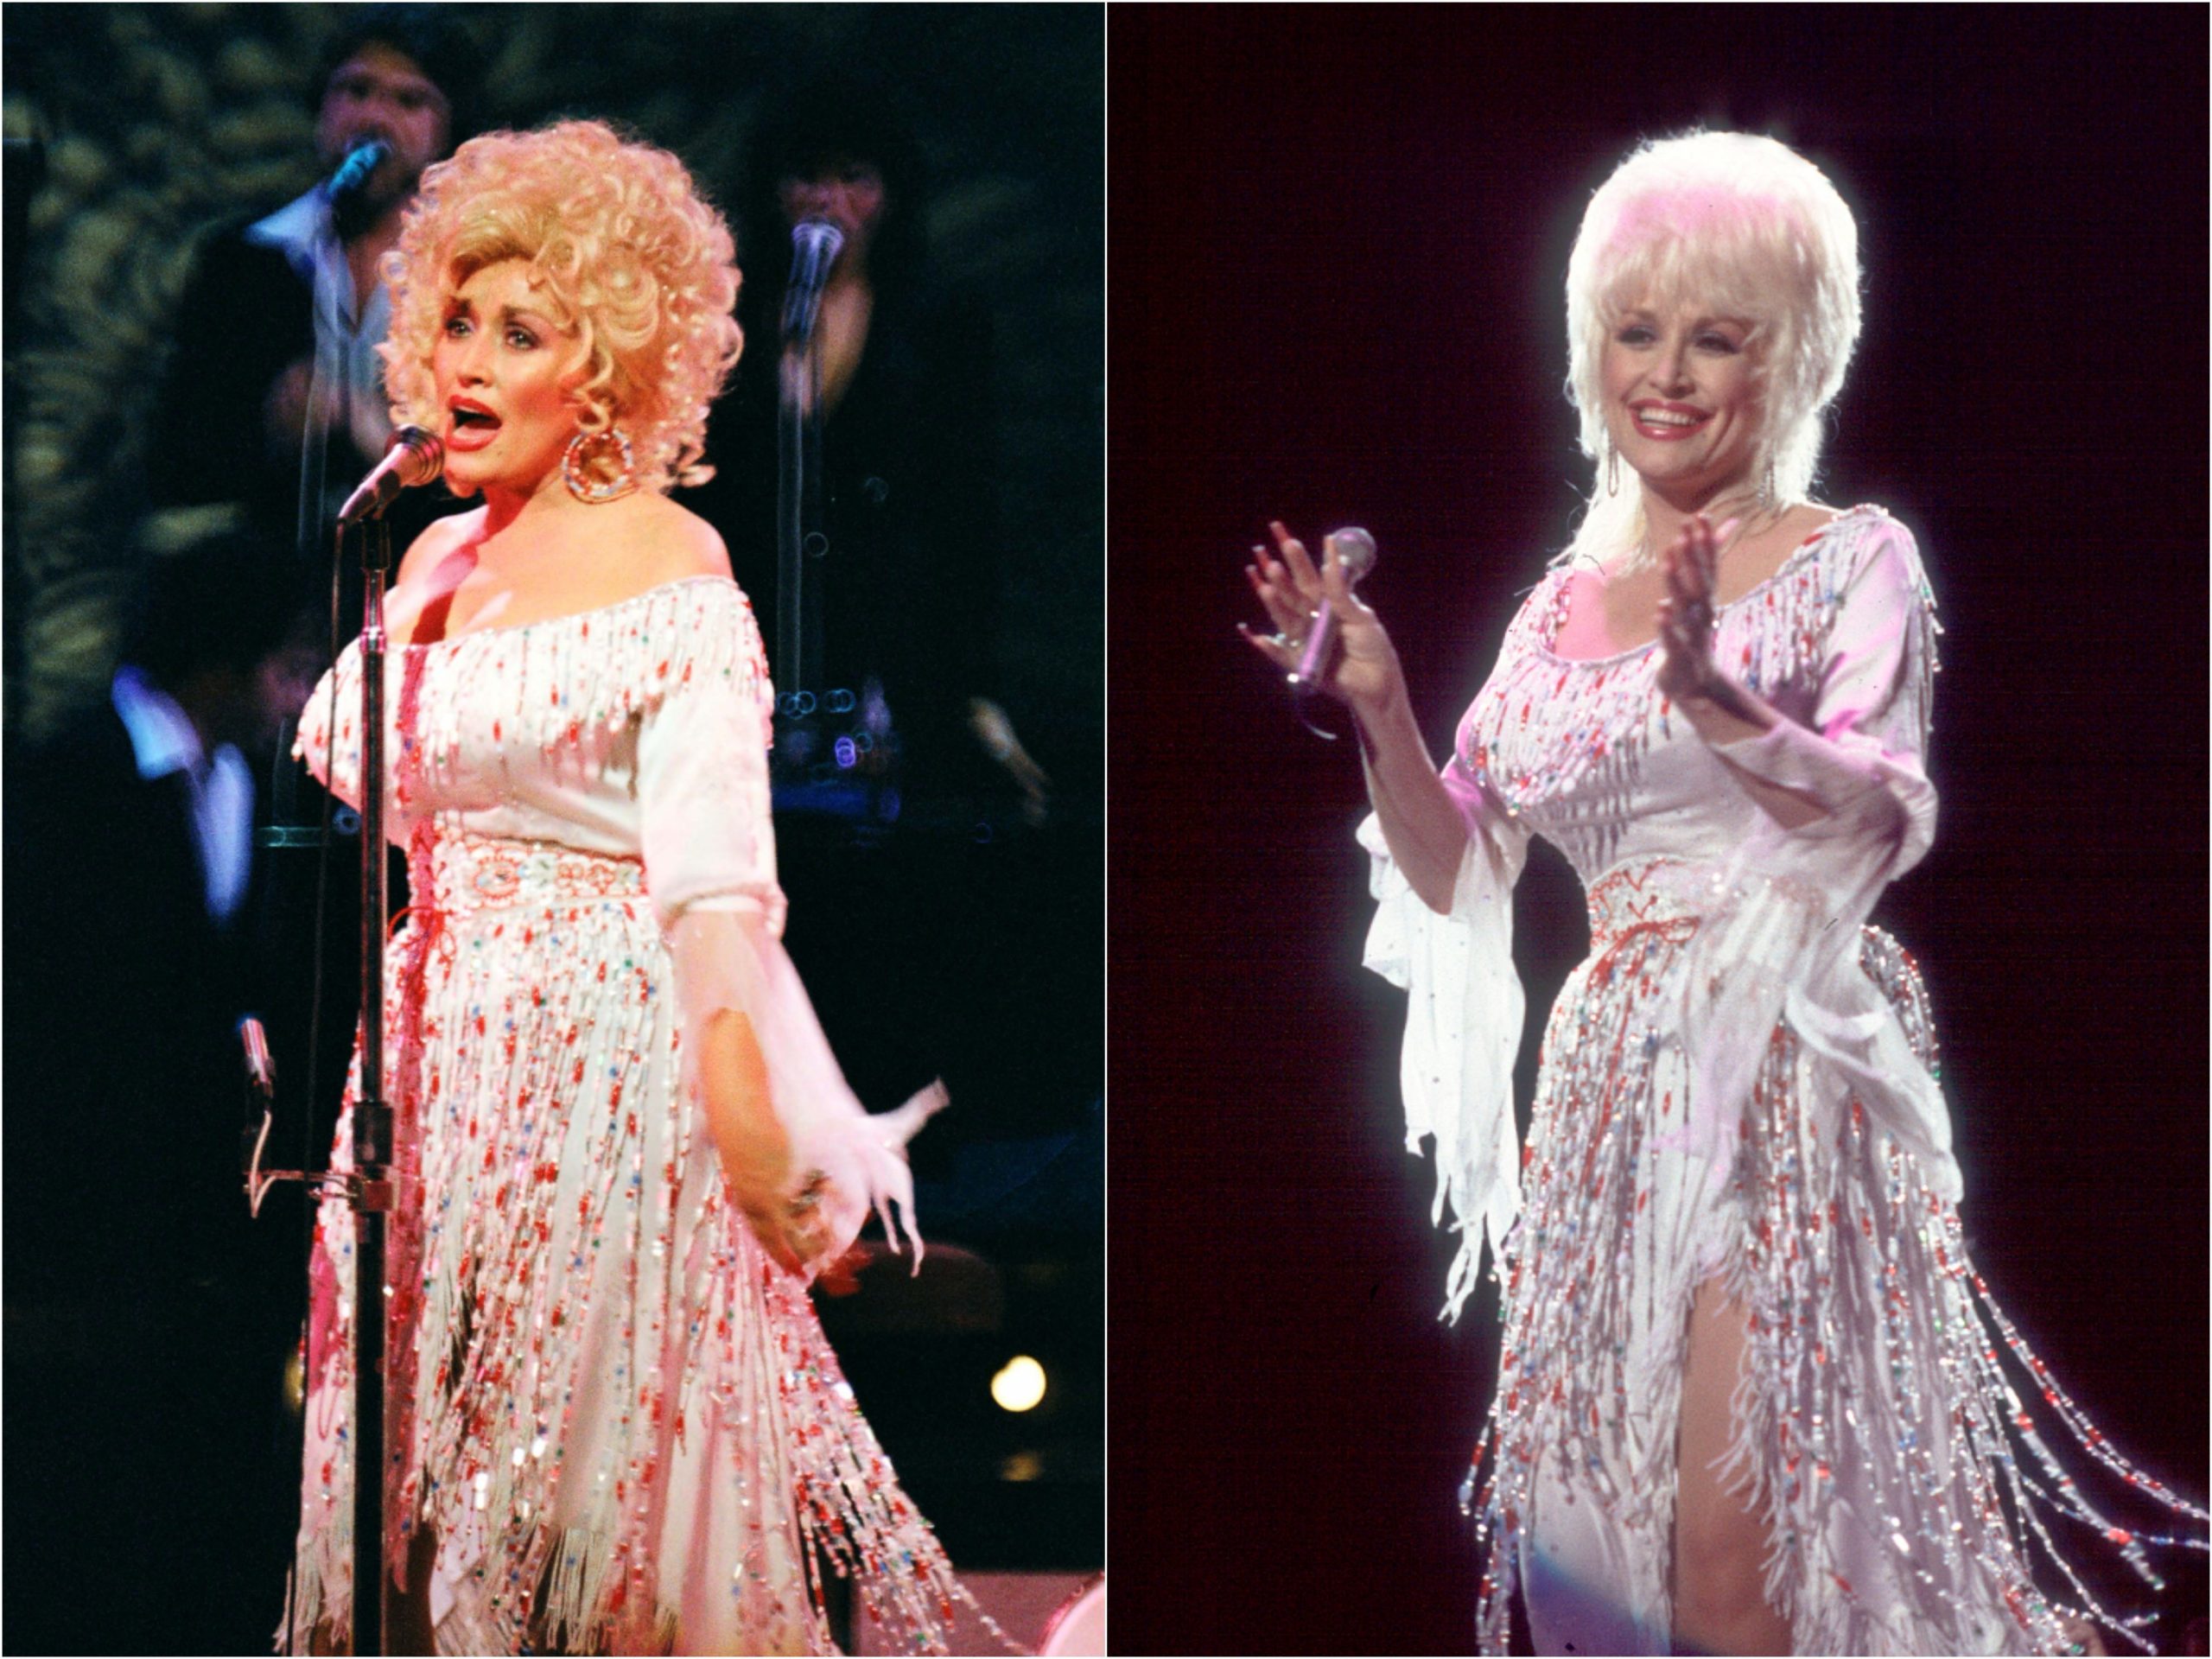 Side-by-side photos of Dolly Parton dressed in the same white scoop neck dress with beaded tassels.